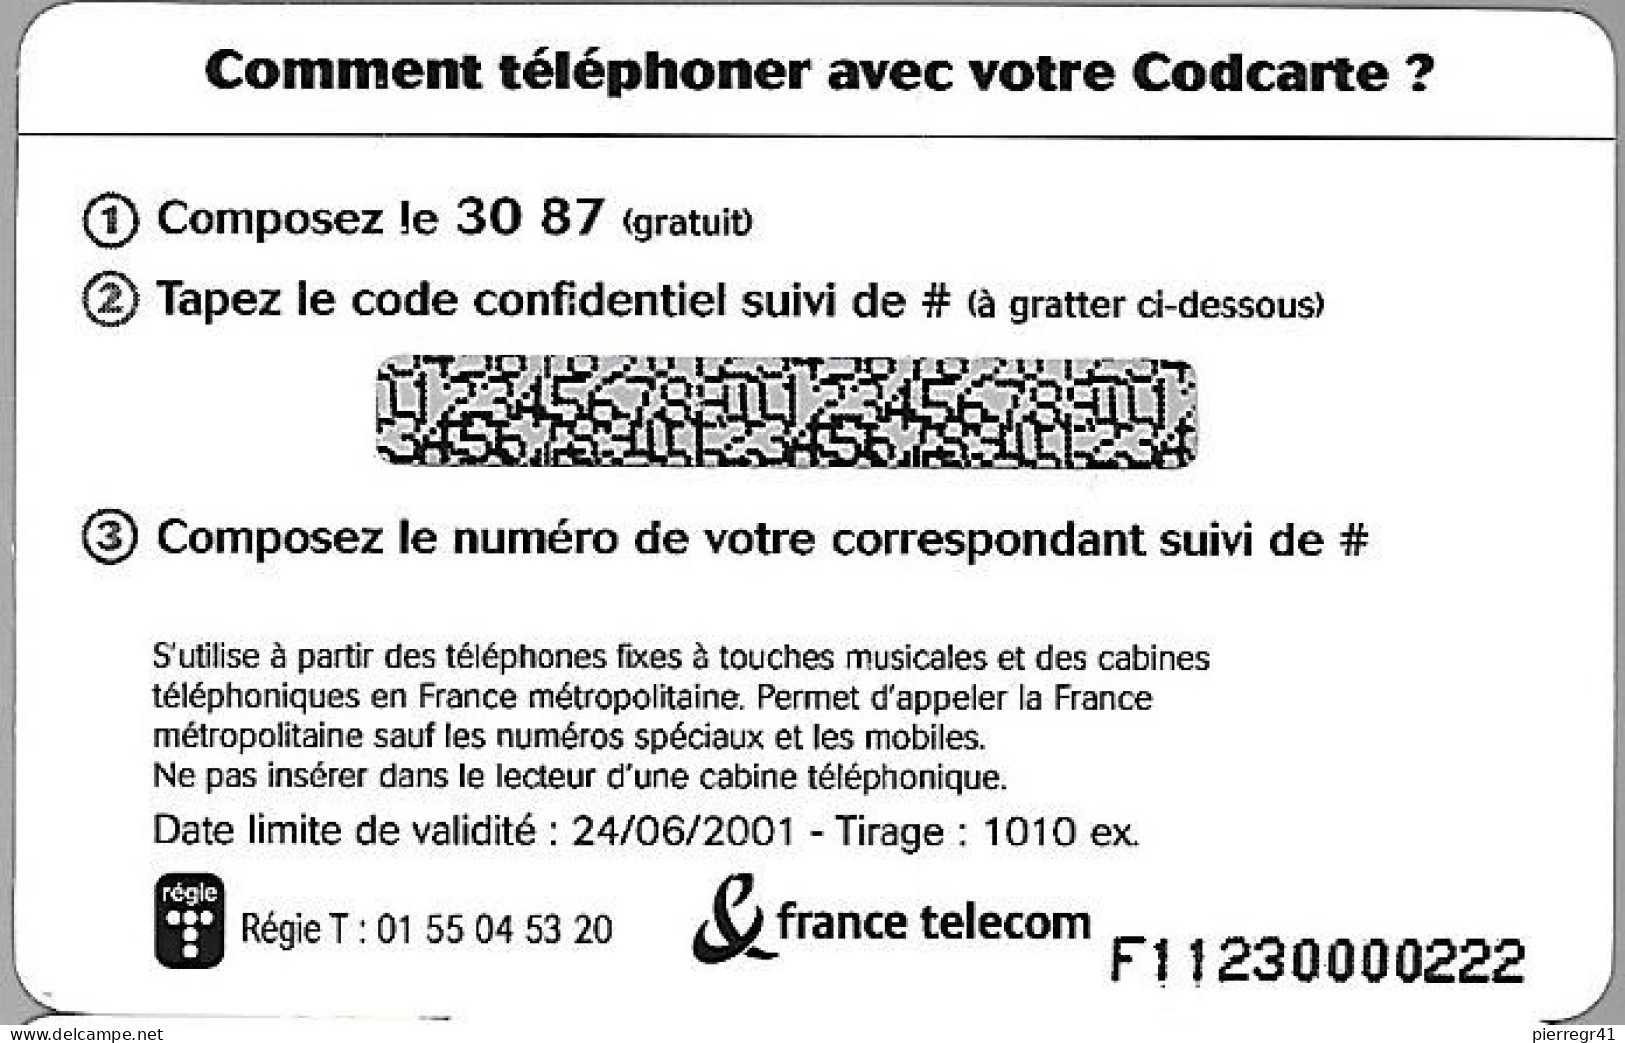 CODECARD-FT-3MN-GRATUITES -RENAULT CLIO-24/06/2001-1010 Ex-T BE - FT